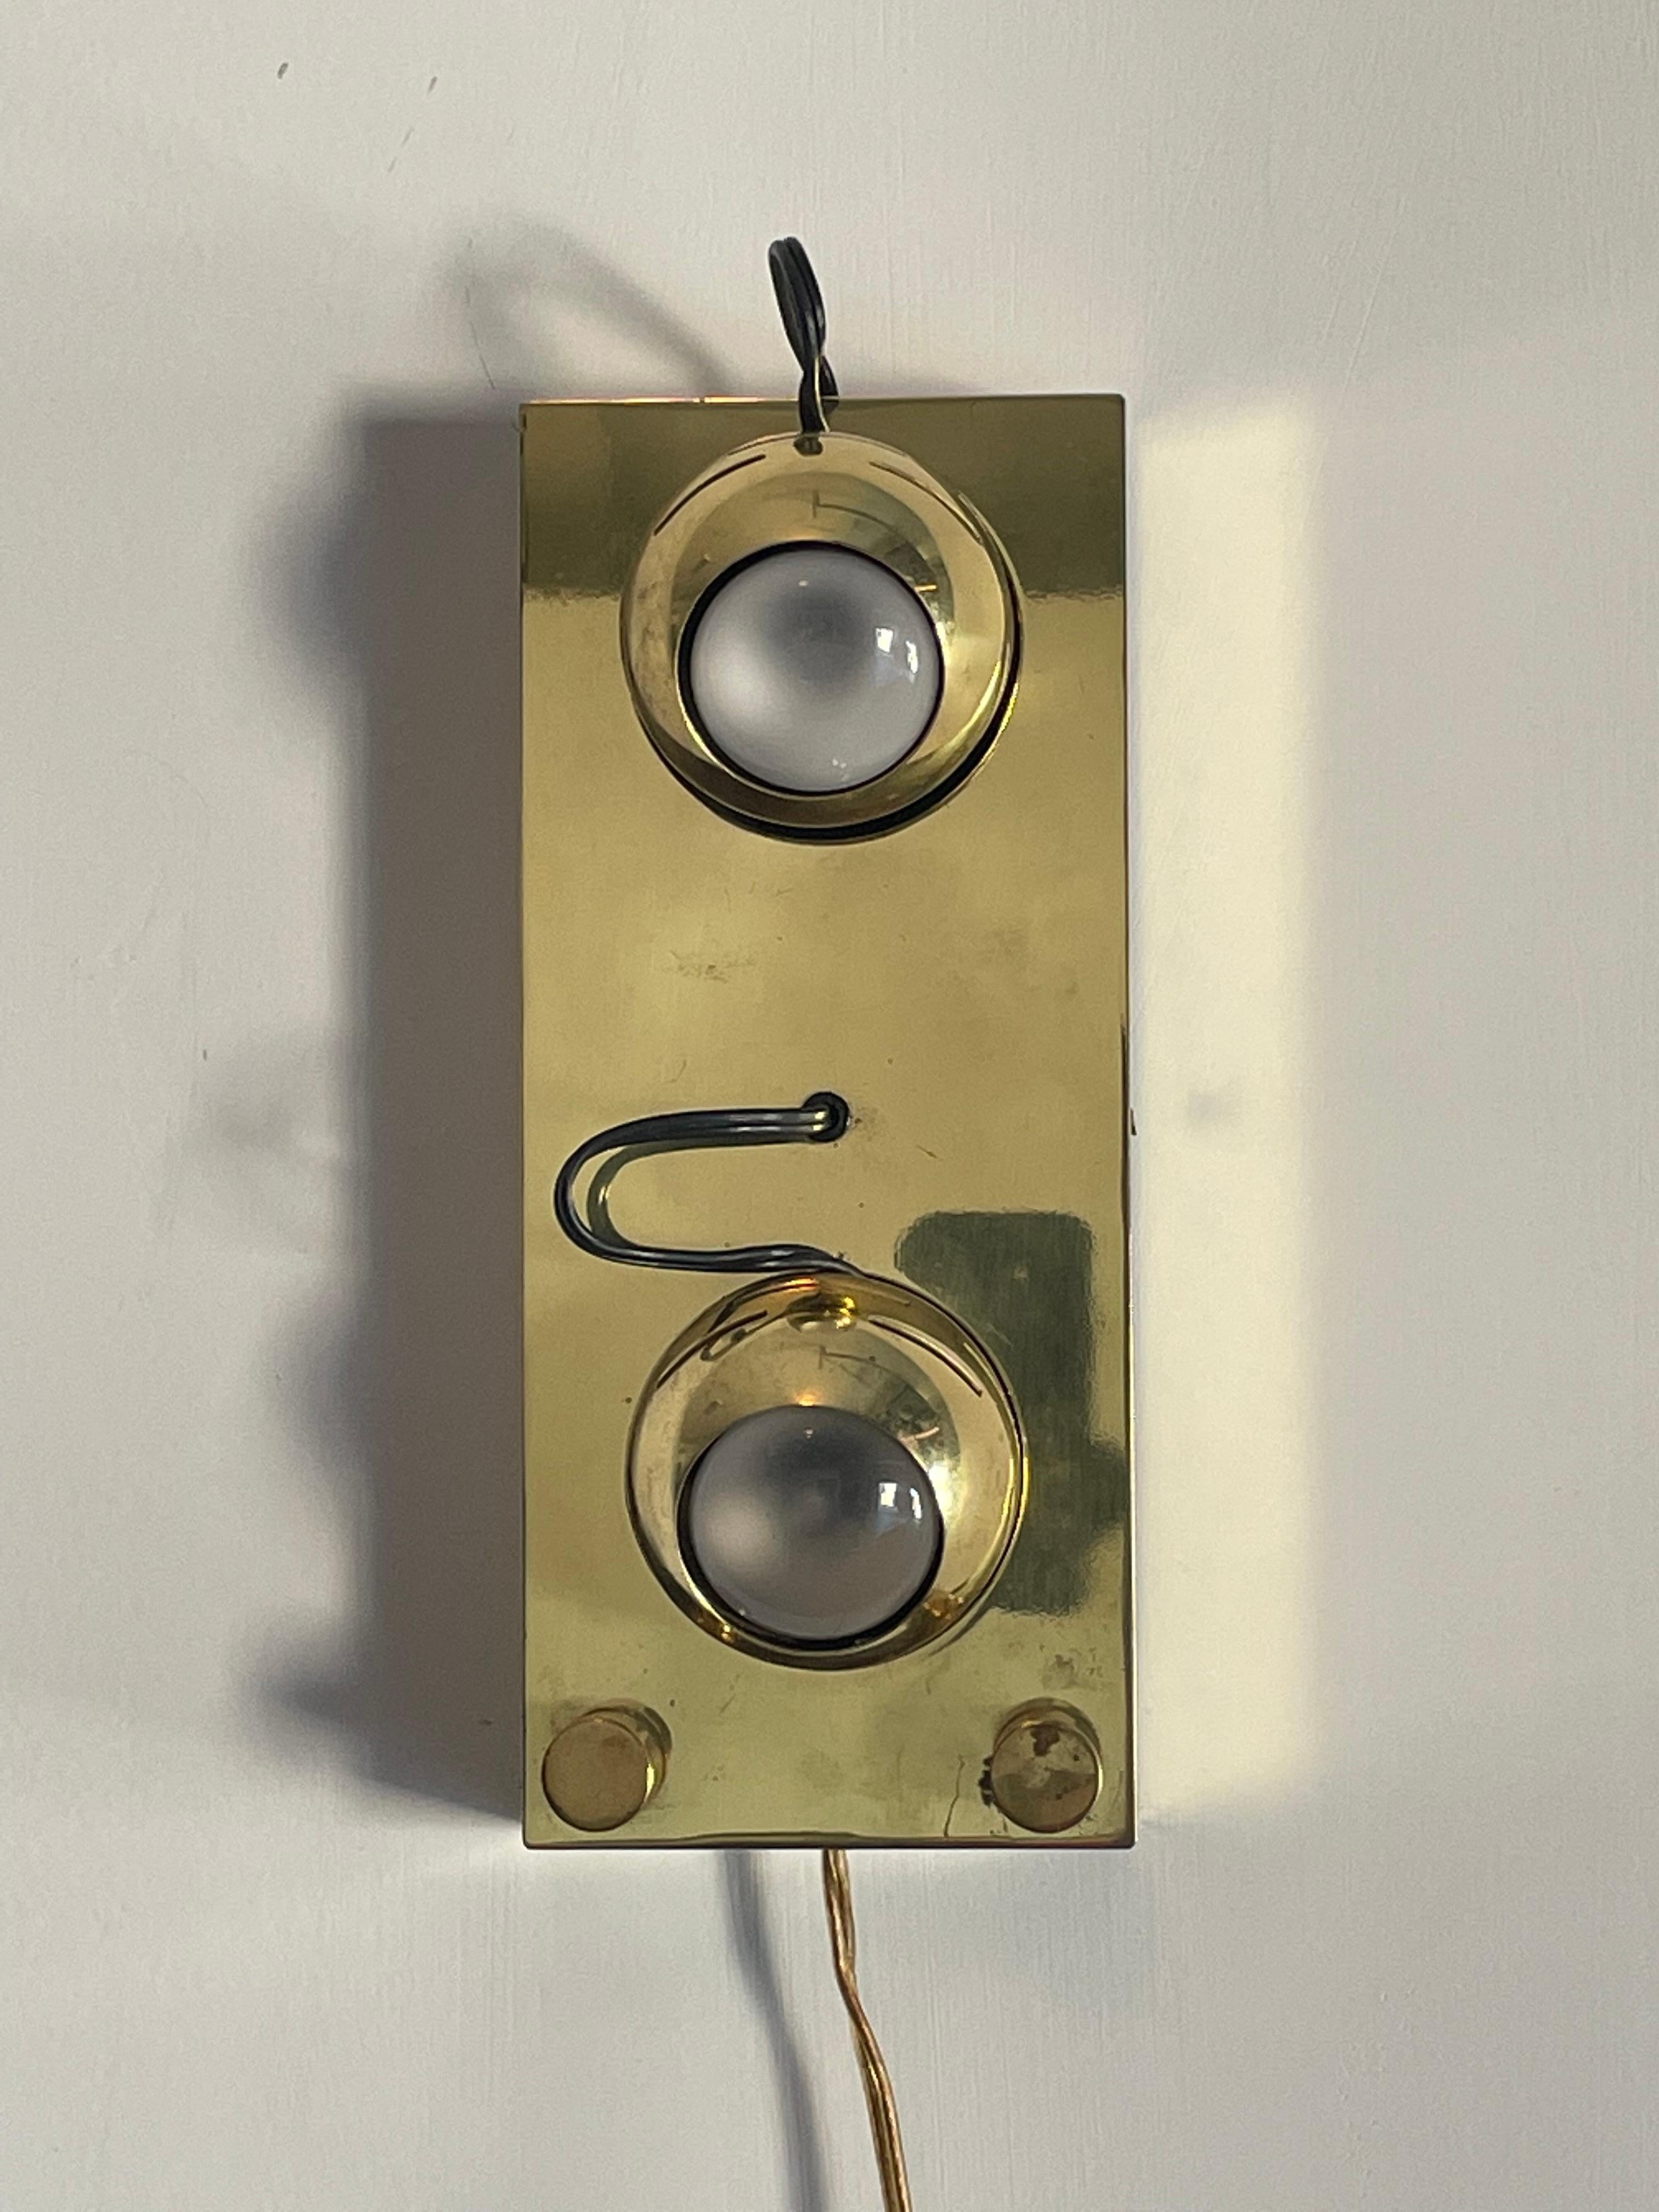 A rare wall light or sconce designed by Angelo Lelii for Arredoluce. Light is polished brass and features two “eyes” that are magnetic and can be removed angled in nearly any direction via a magnet. Light uses dimmable knobs to adjust each bulb